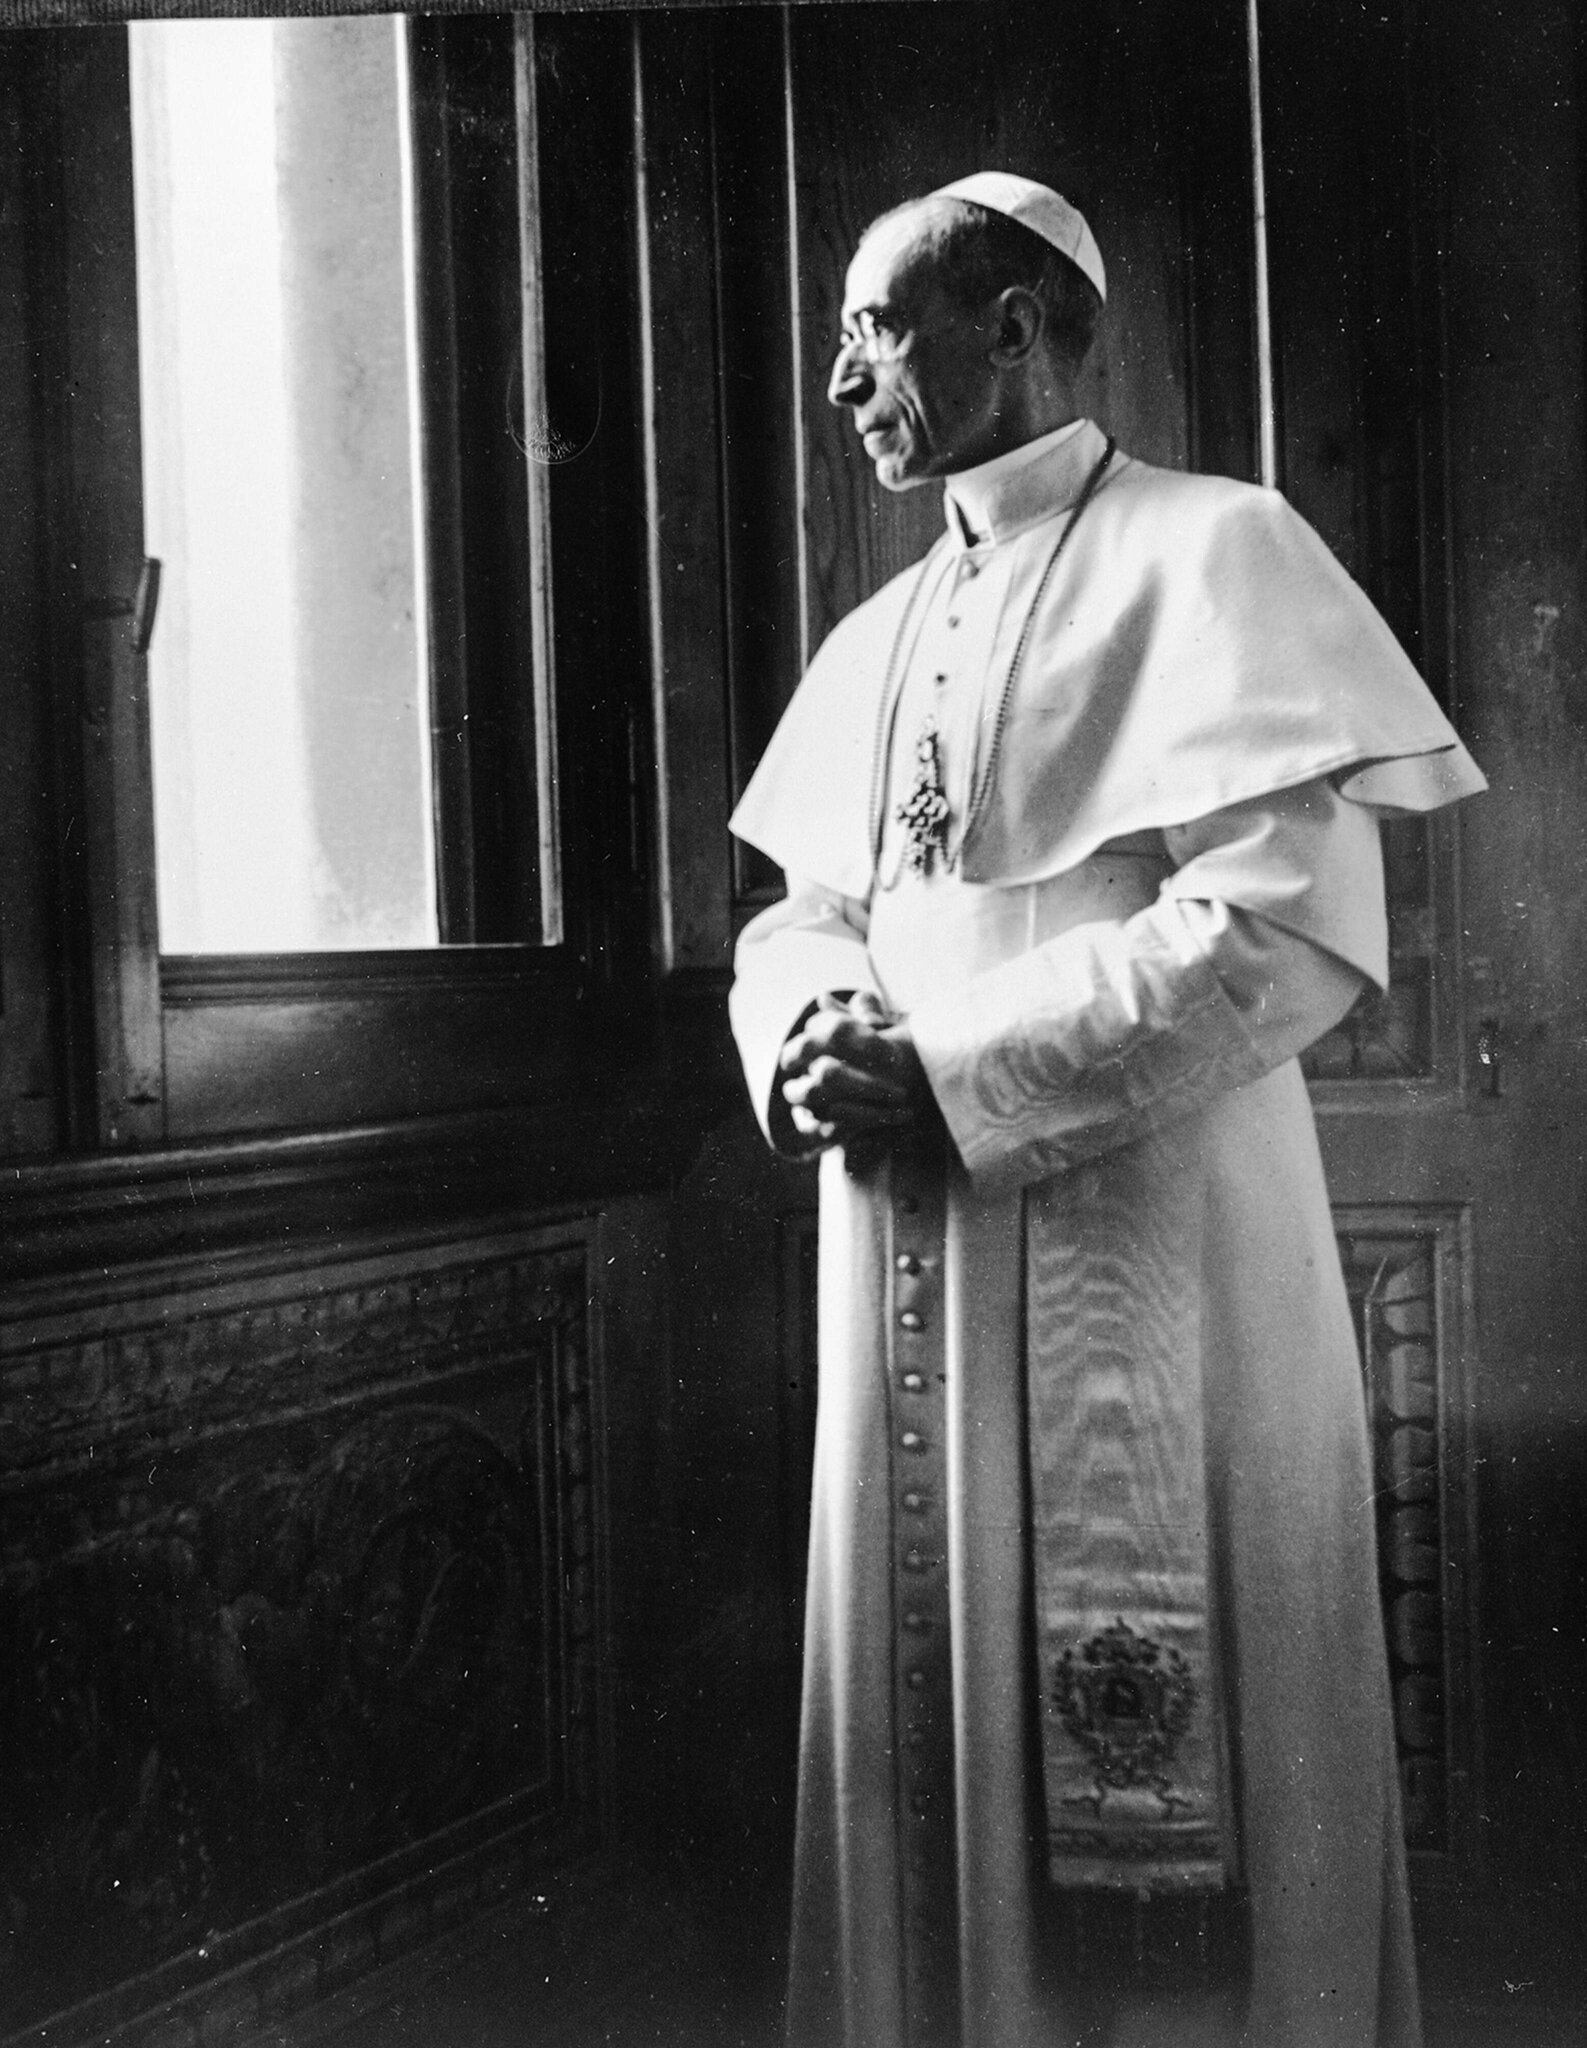 A New Perspective on Pius XII: The Pope’s Cabinet, a Review